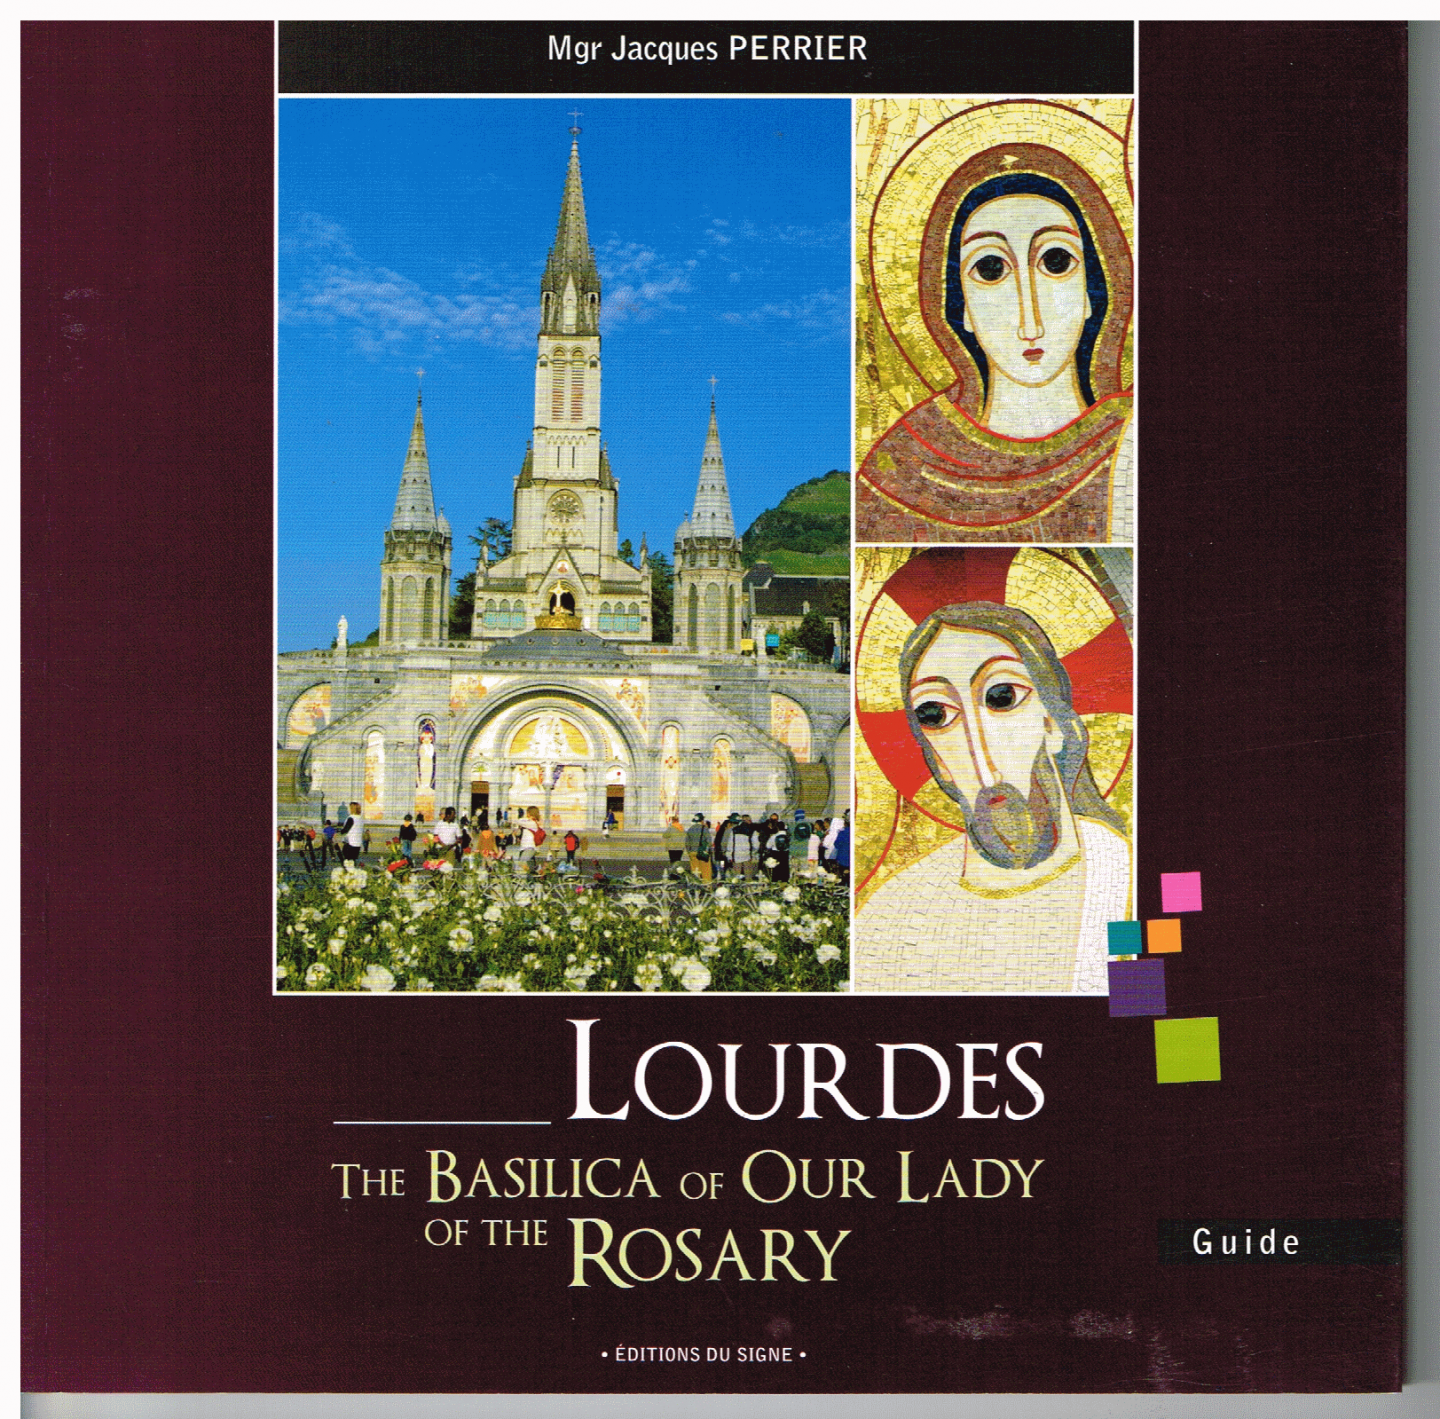 Perrier, Jaques - Lourdes - The Basilica of Our Lady of the Rosary